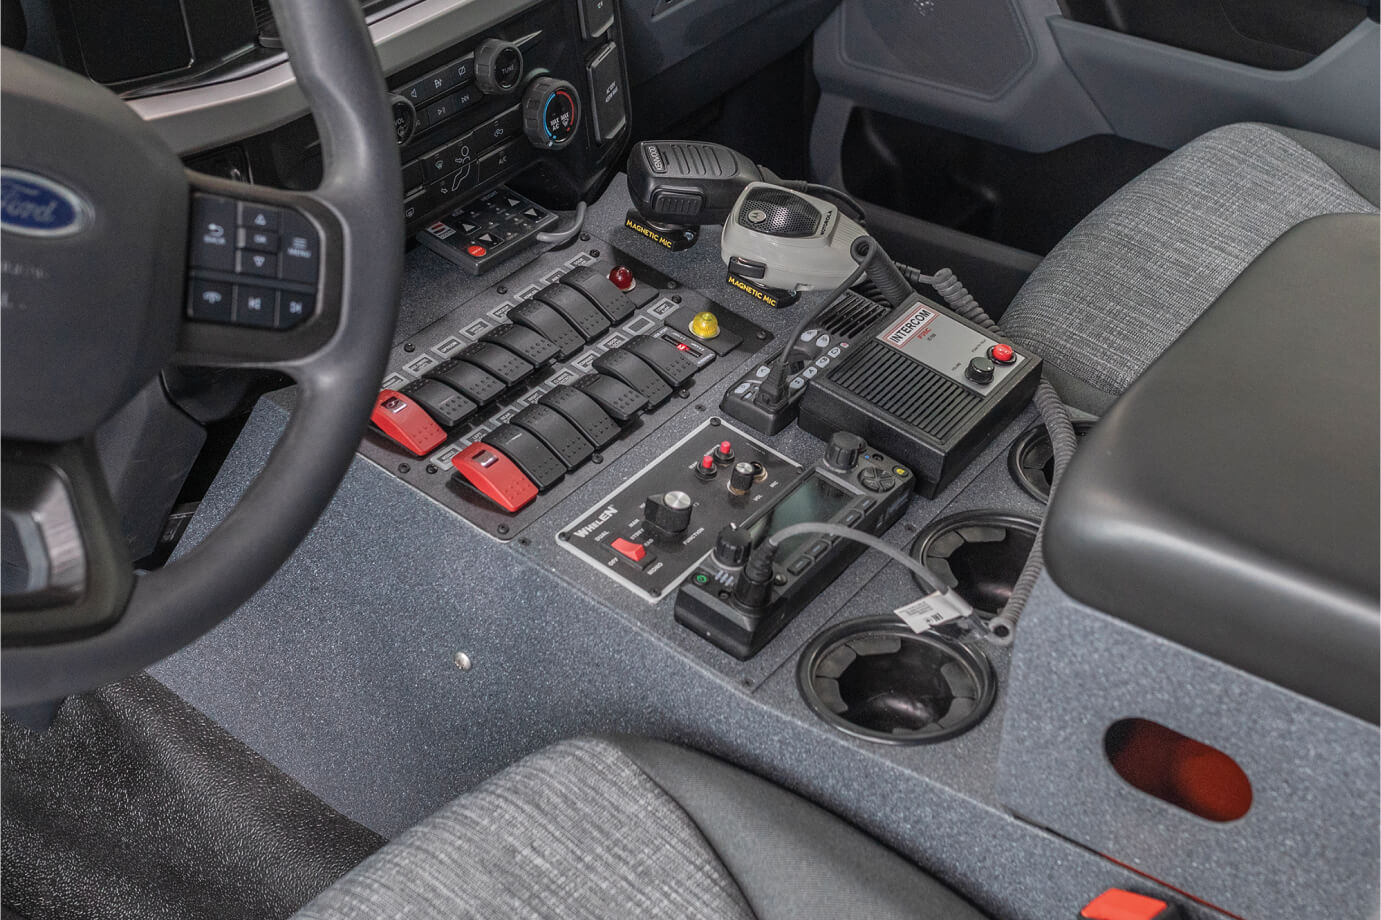 Command Center with Rocker Switches